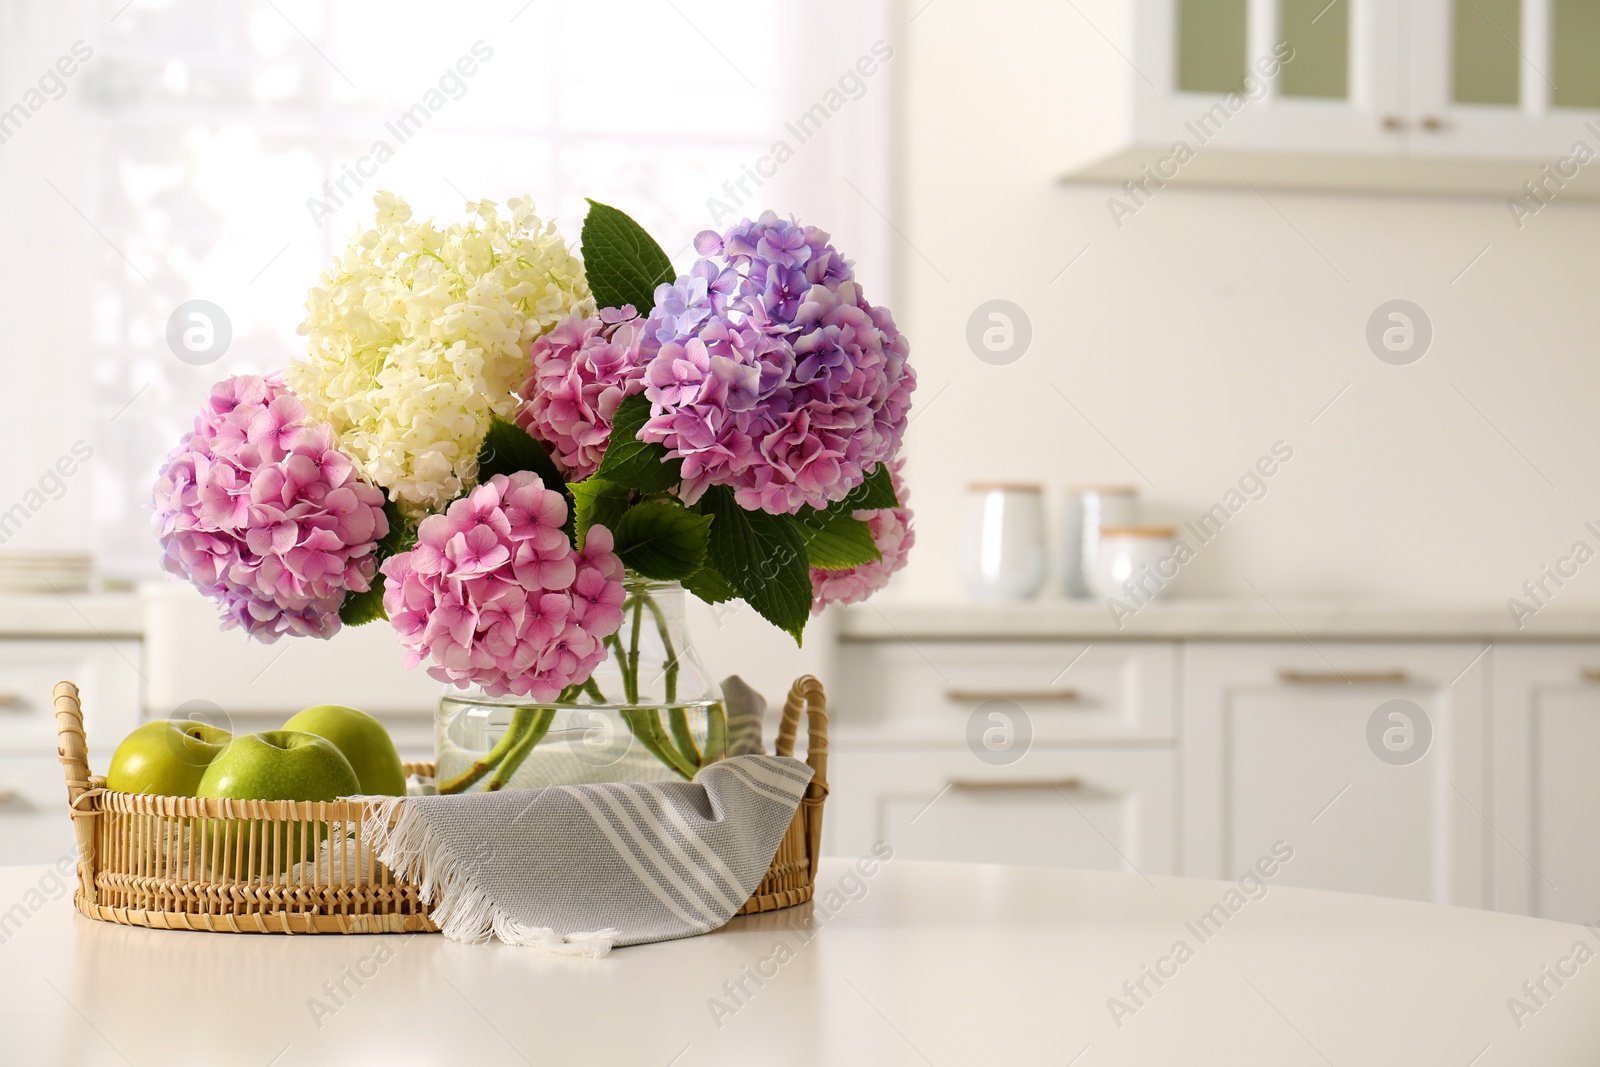 Photo of Bouquet of beautiful hydrangea flowers and apples on table in kitchen, space for text. Interior design